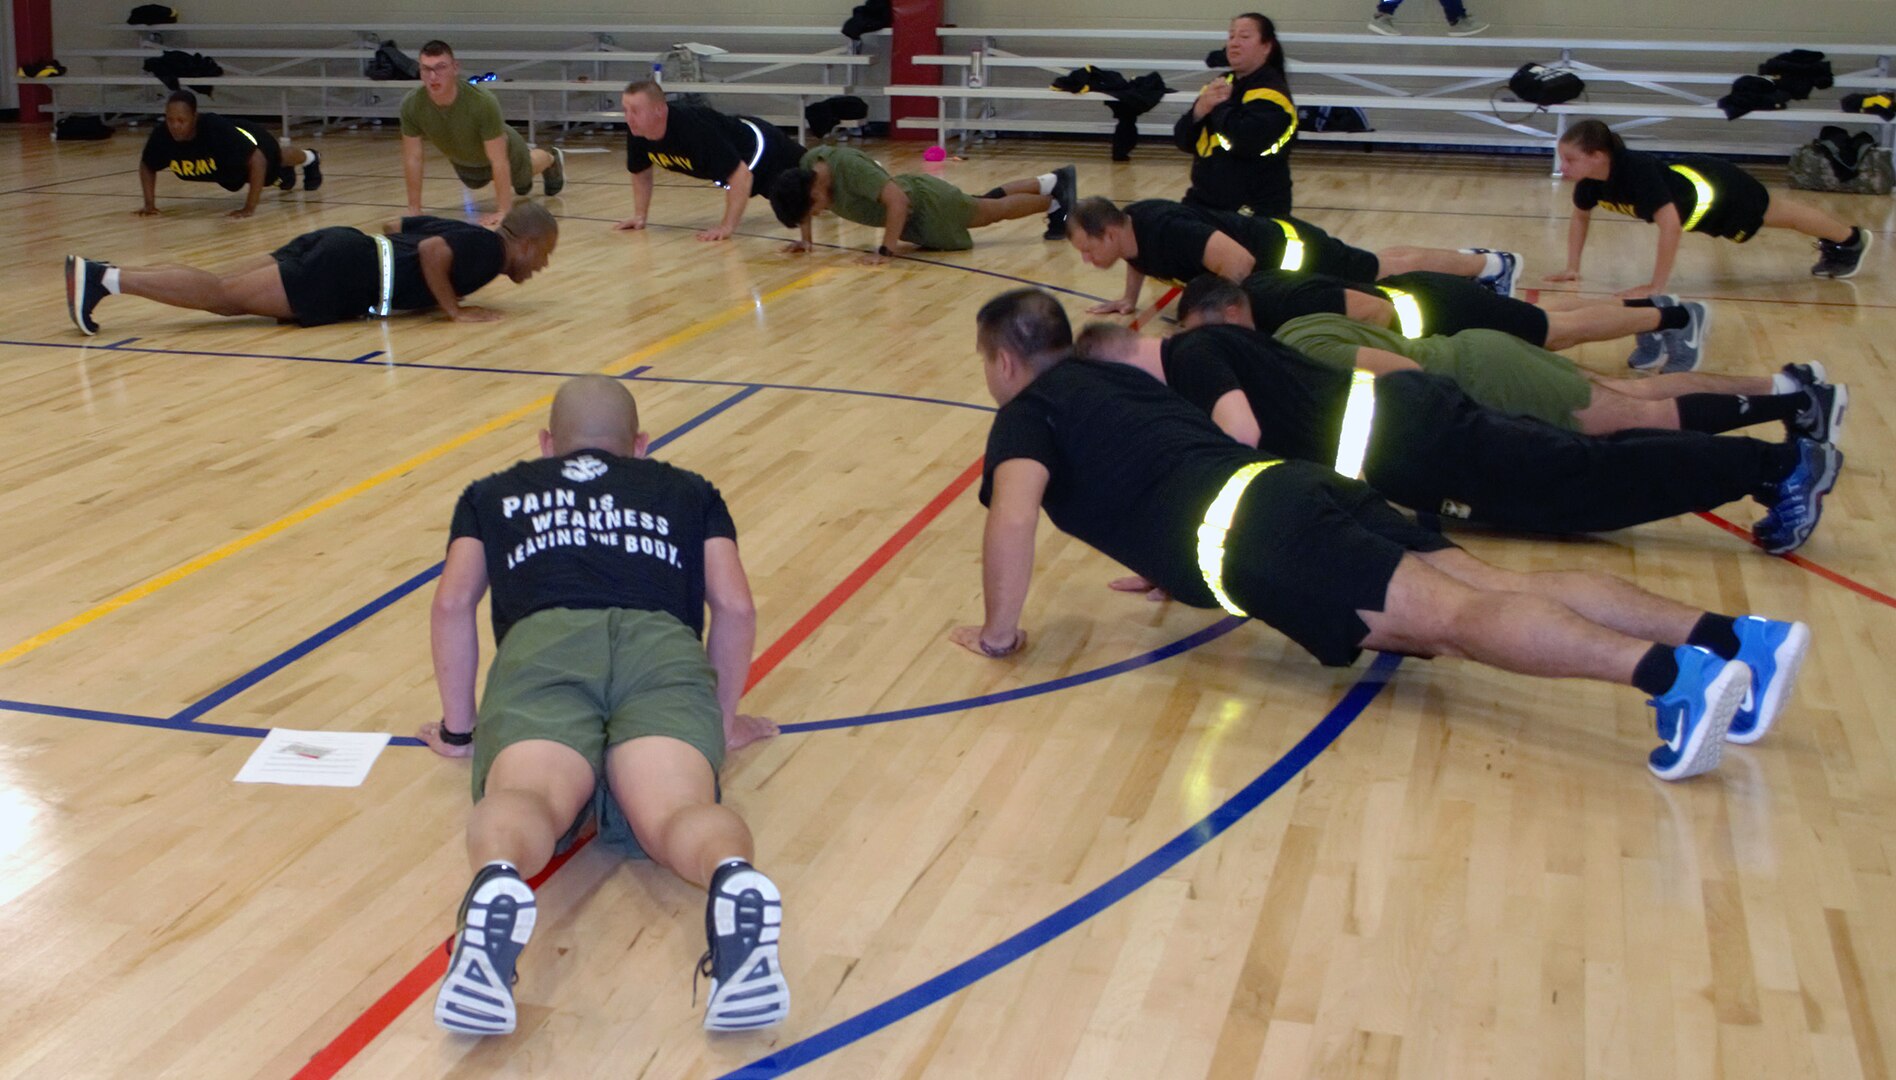 To commemorate the event which drove the nation into World War II, the recovering service members and supporting staff at the Joint Base San Antonio Warrior Transition Battalion conducted a unified physical training event to commemorate the 77th Pearl Harbor anniversary at the Fitness Center at the Medical Education and Training Campus Dec. 7, 2018.